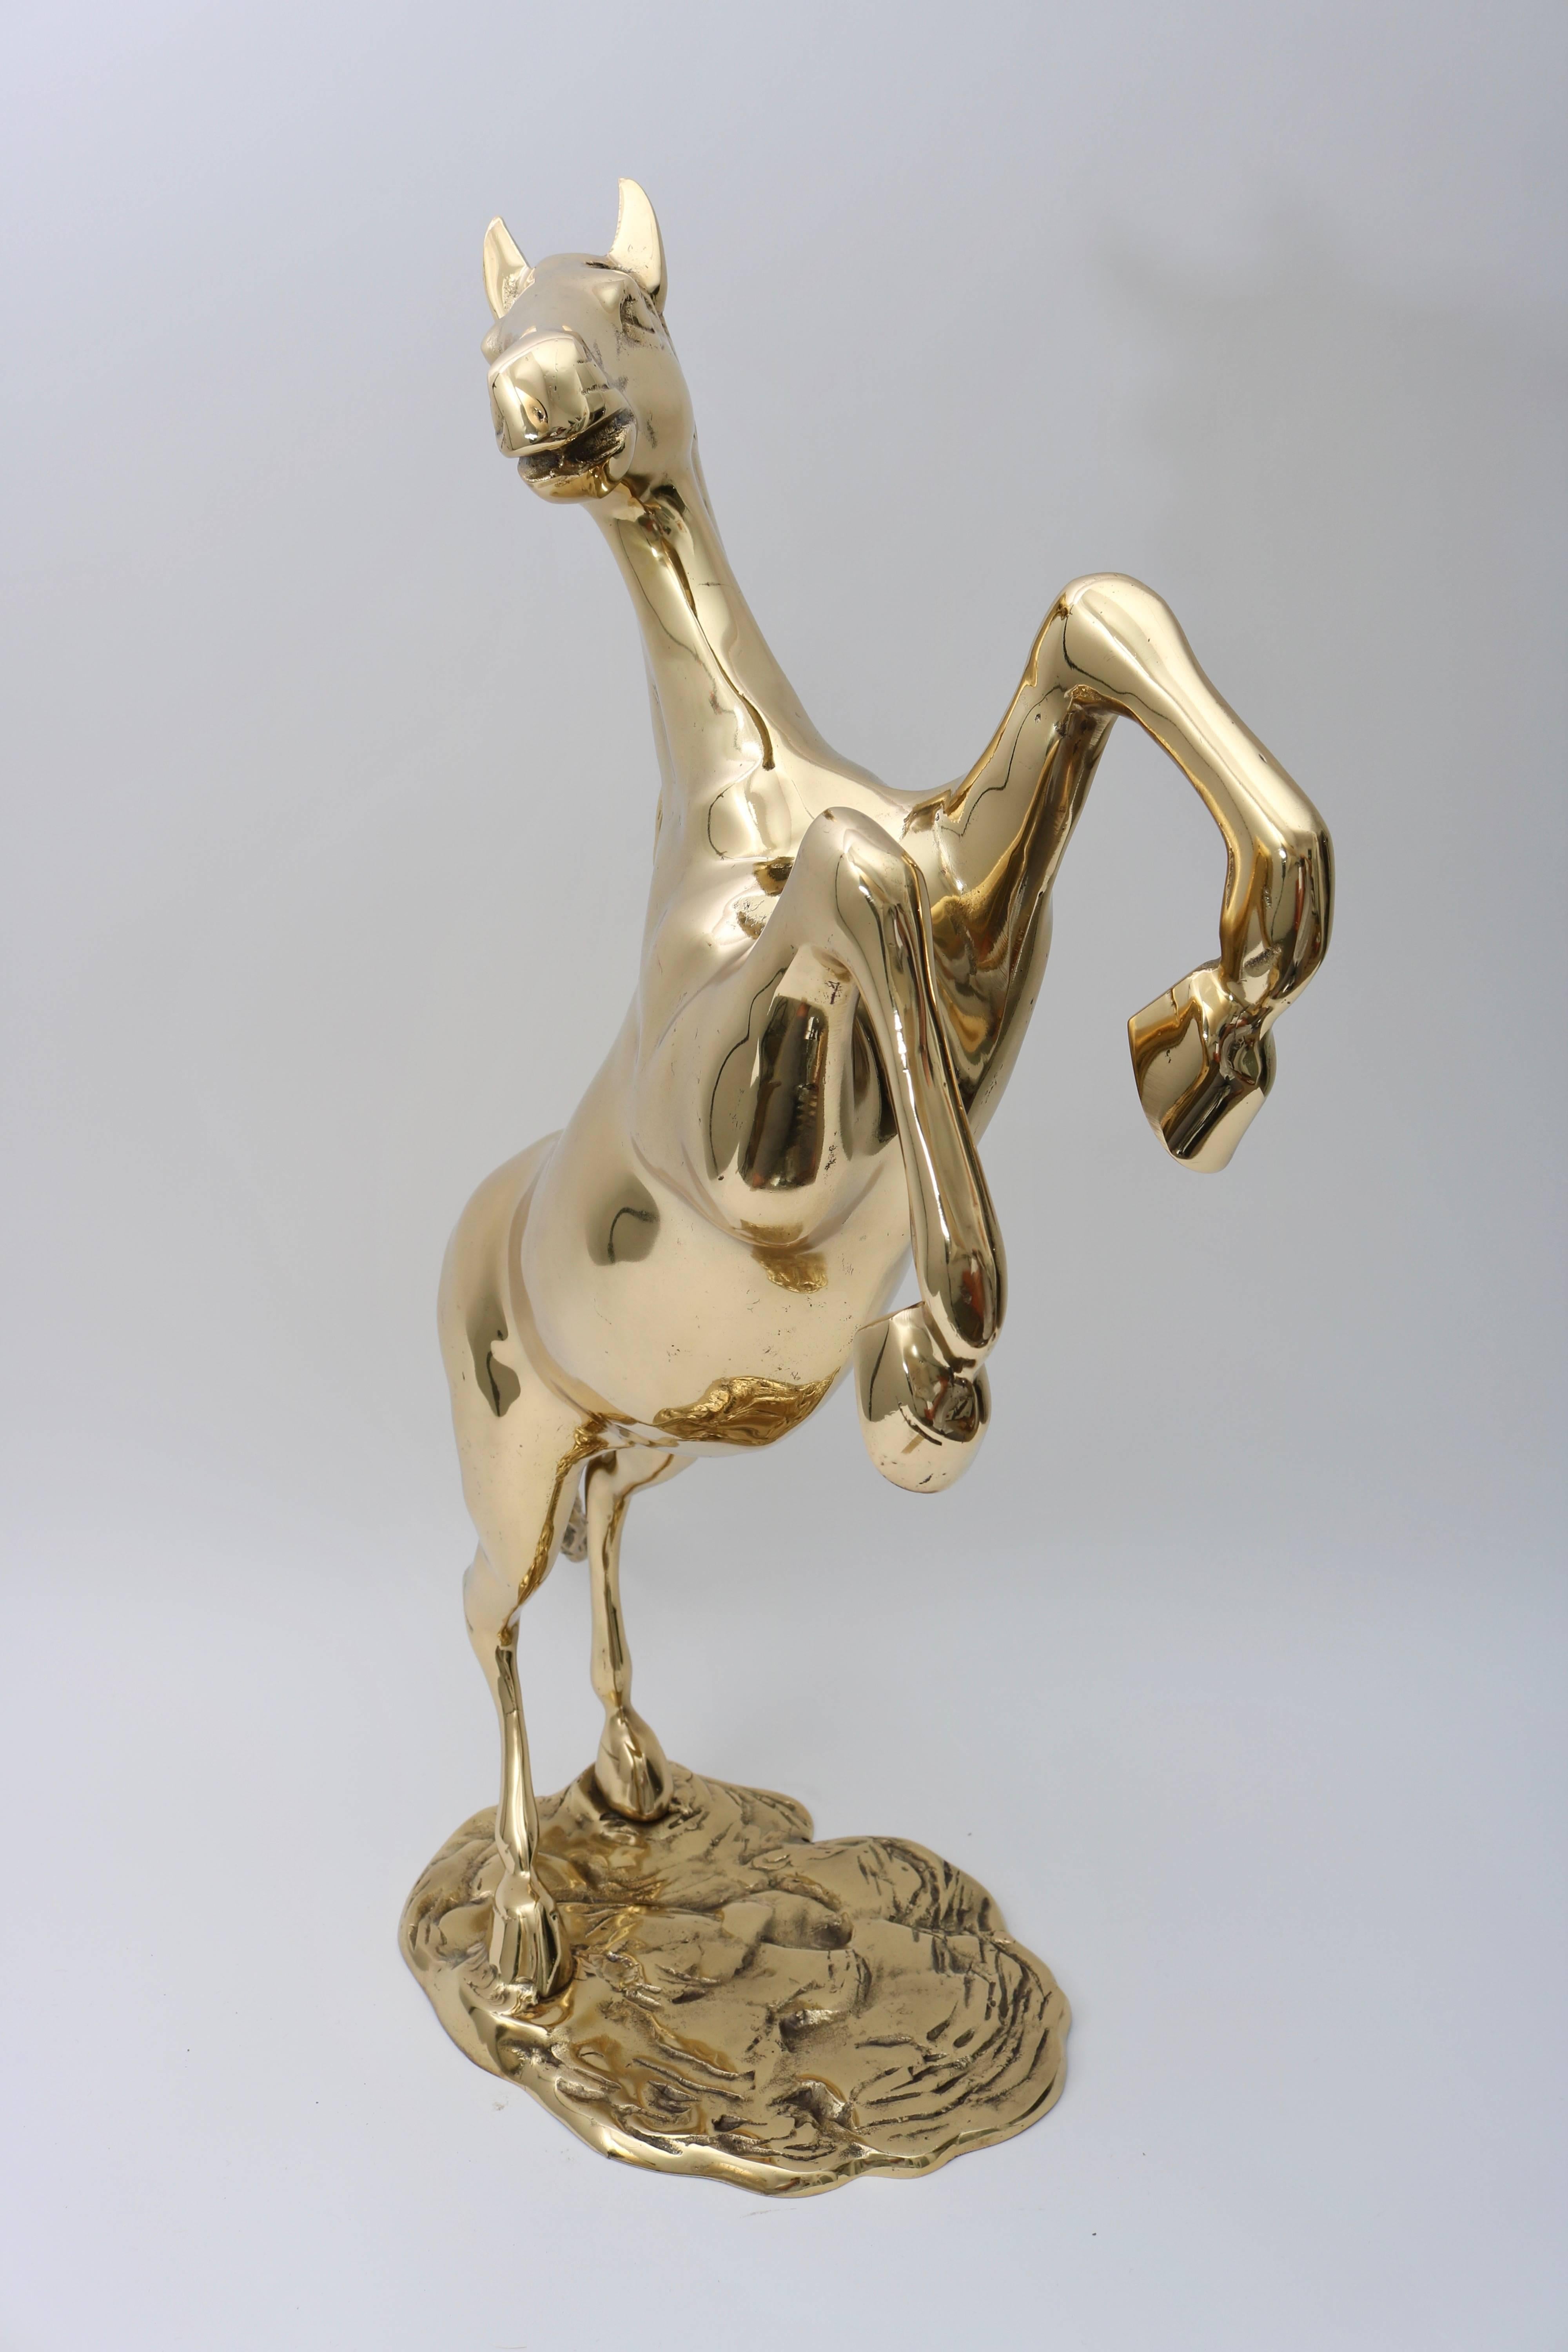 This large-scale sculpture of a rearing horse dates to the 1950s and has recently been professionally polished and has a clear lacquer coating.

Note: Base dimensions are 8.75